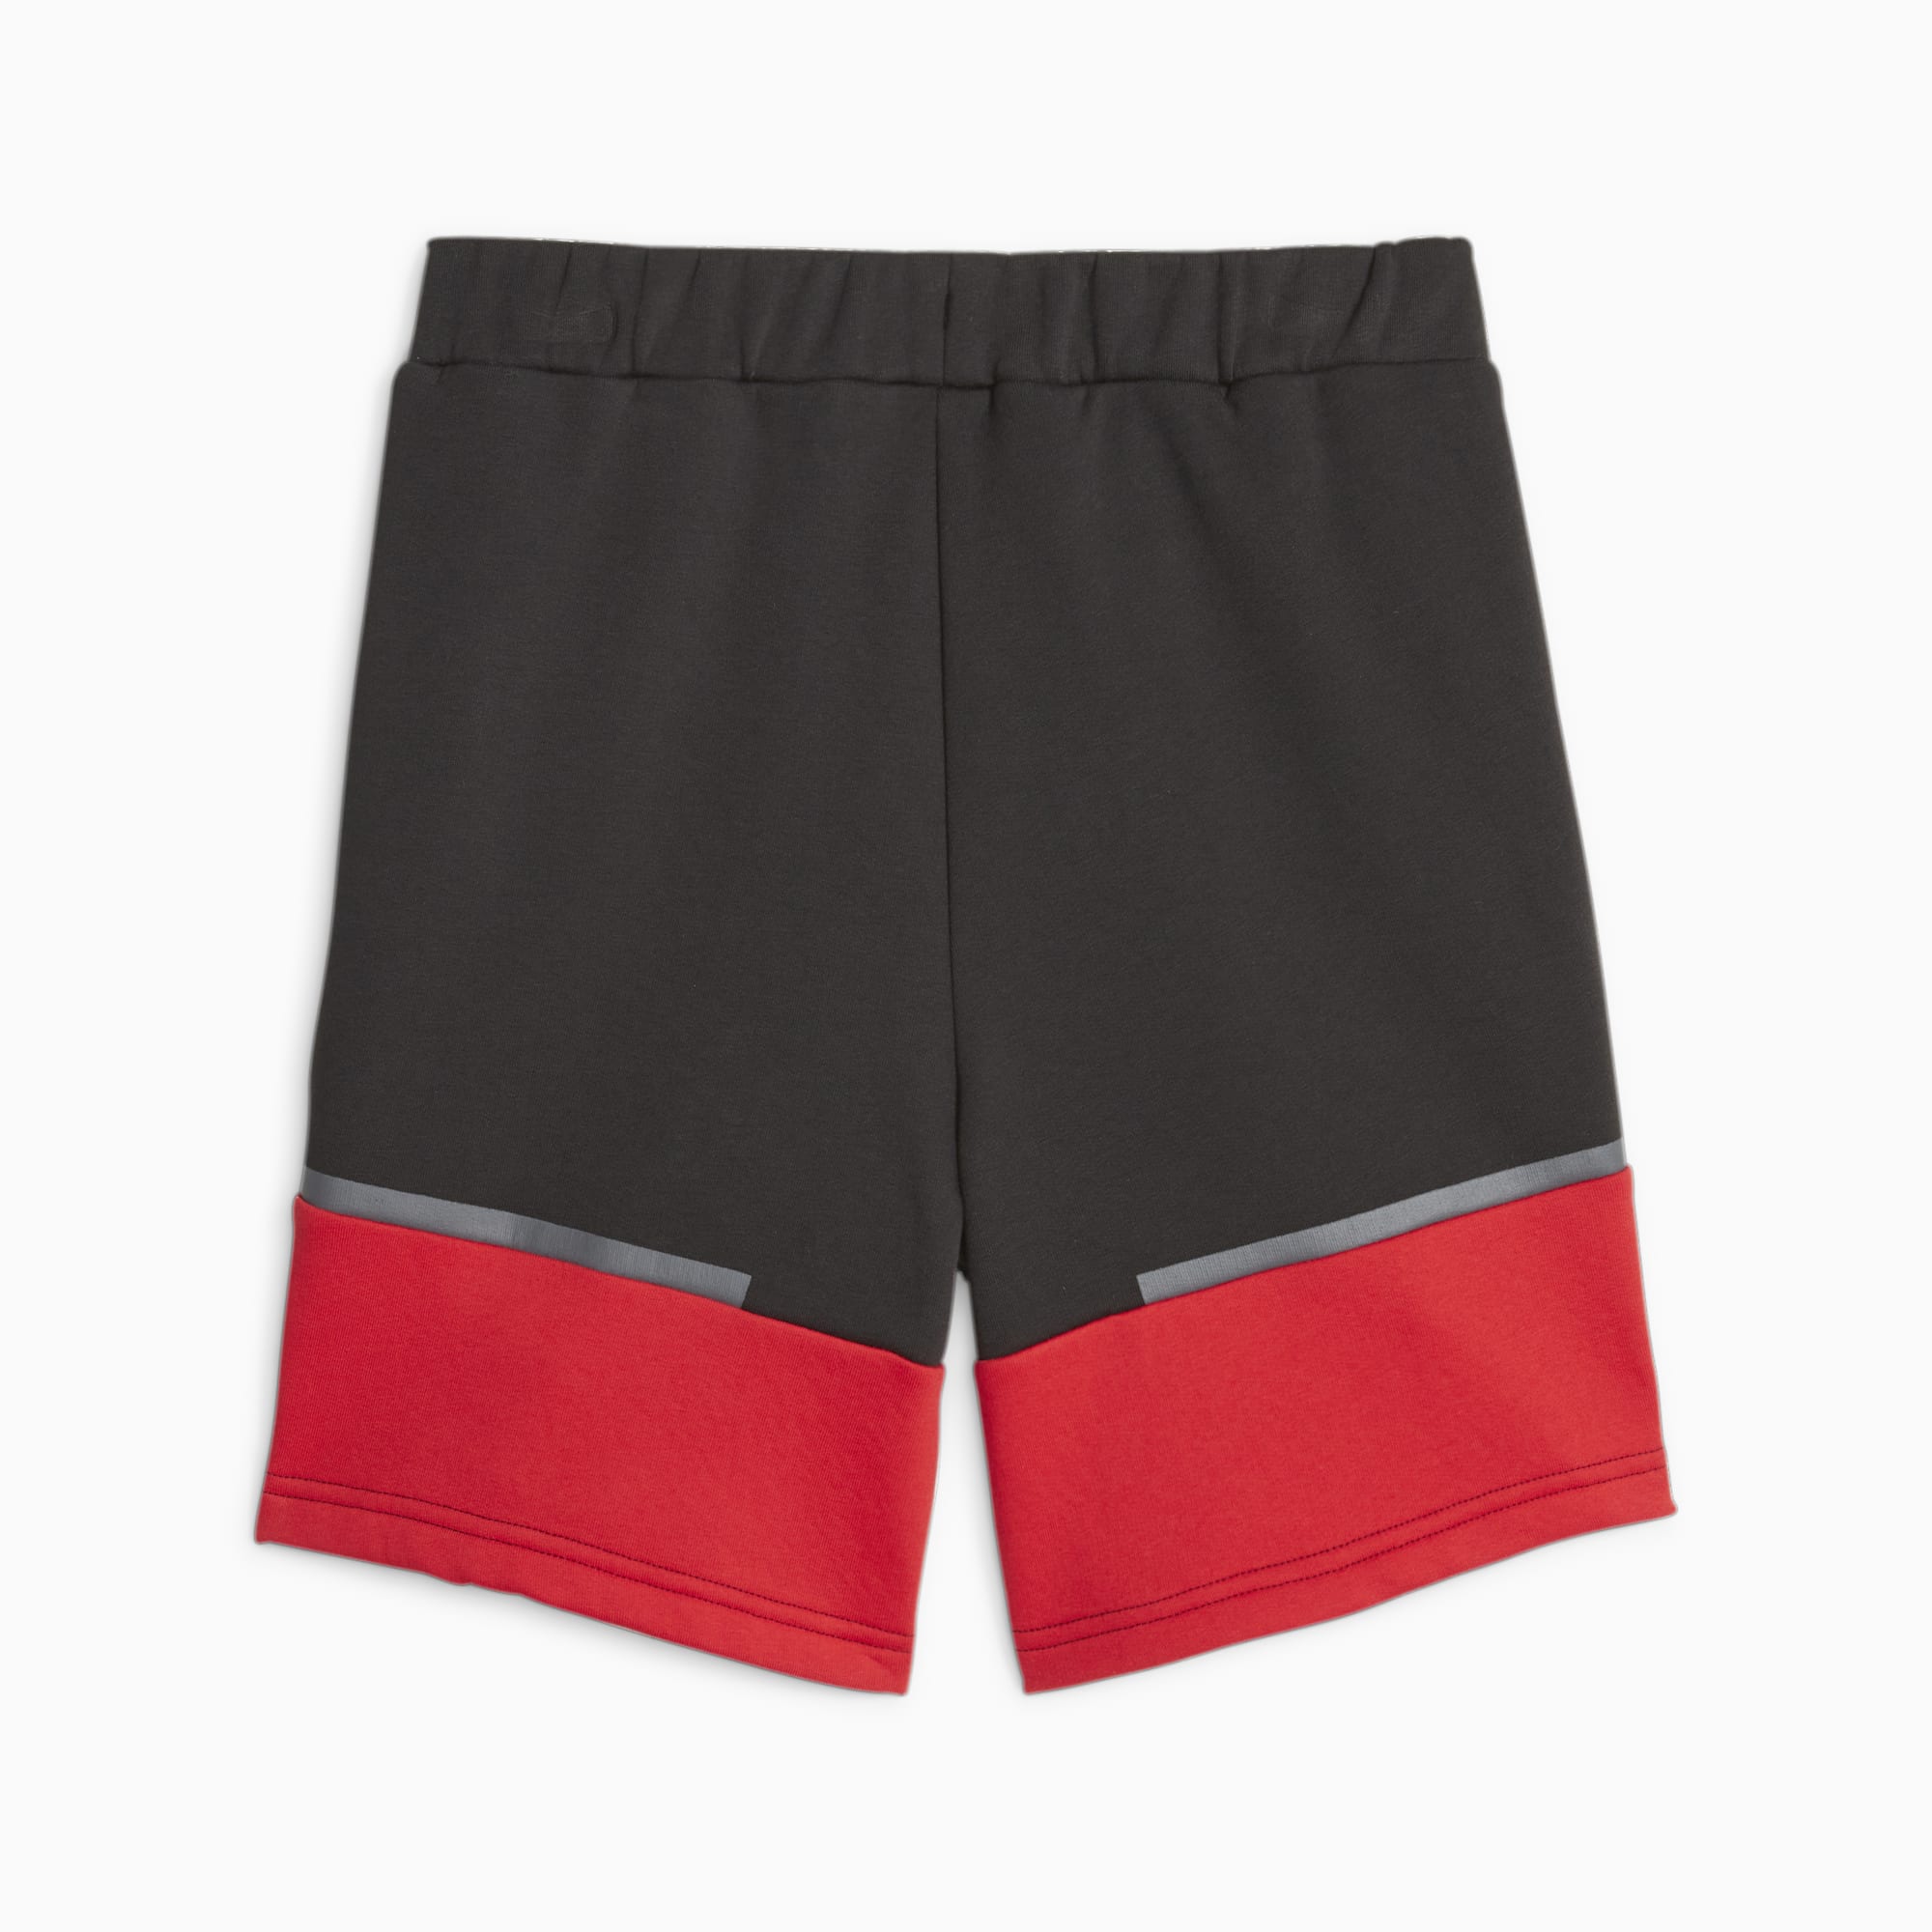 PUMA AC Milan Football Casuals Youth Shorts, Black/For All Time Red